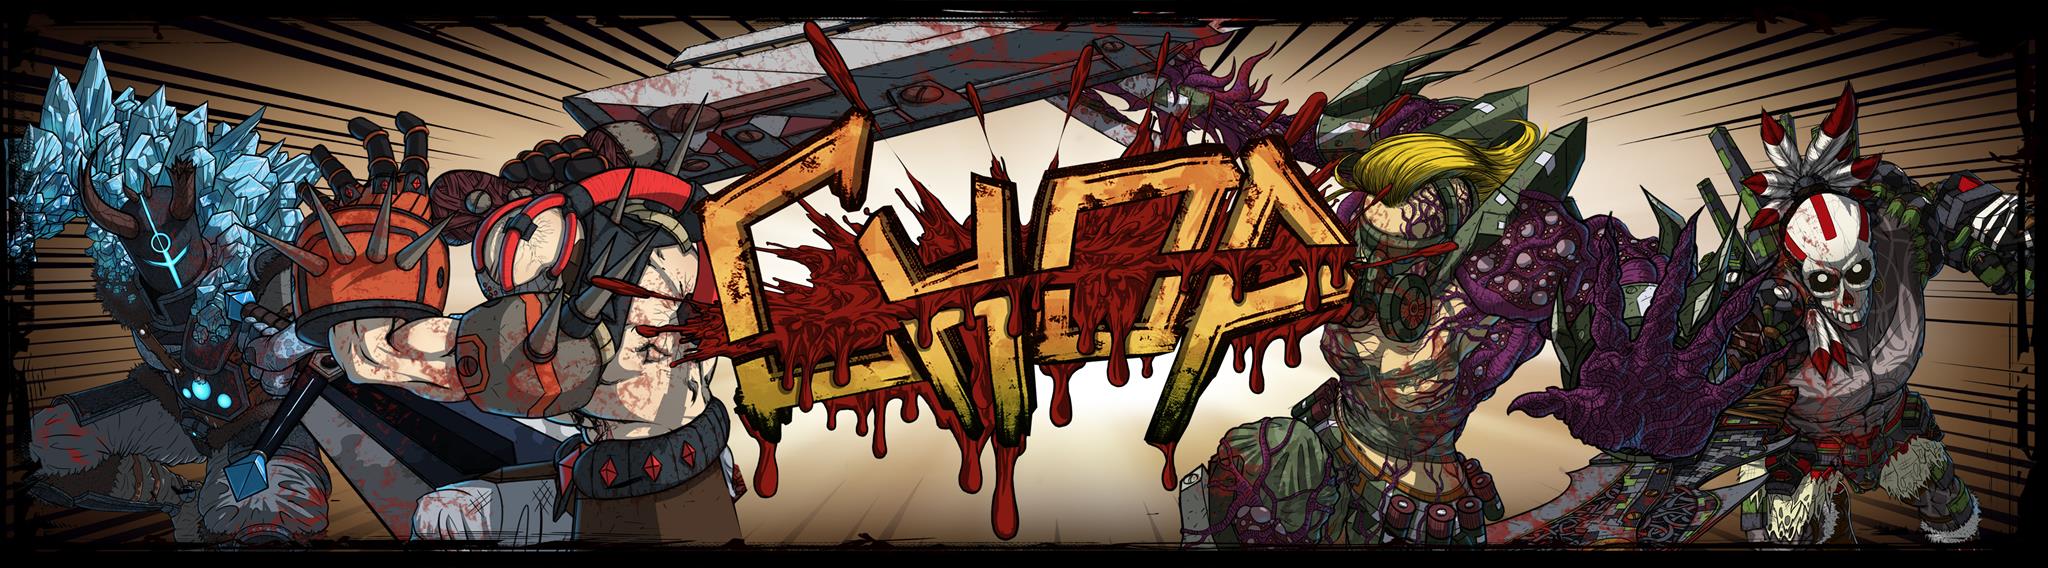 CHOP - A highly brutal party game